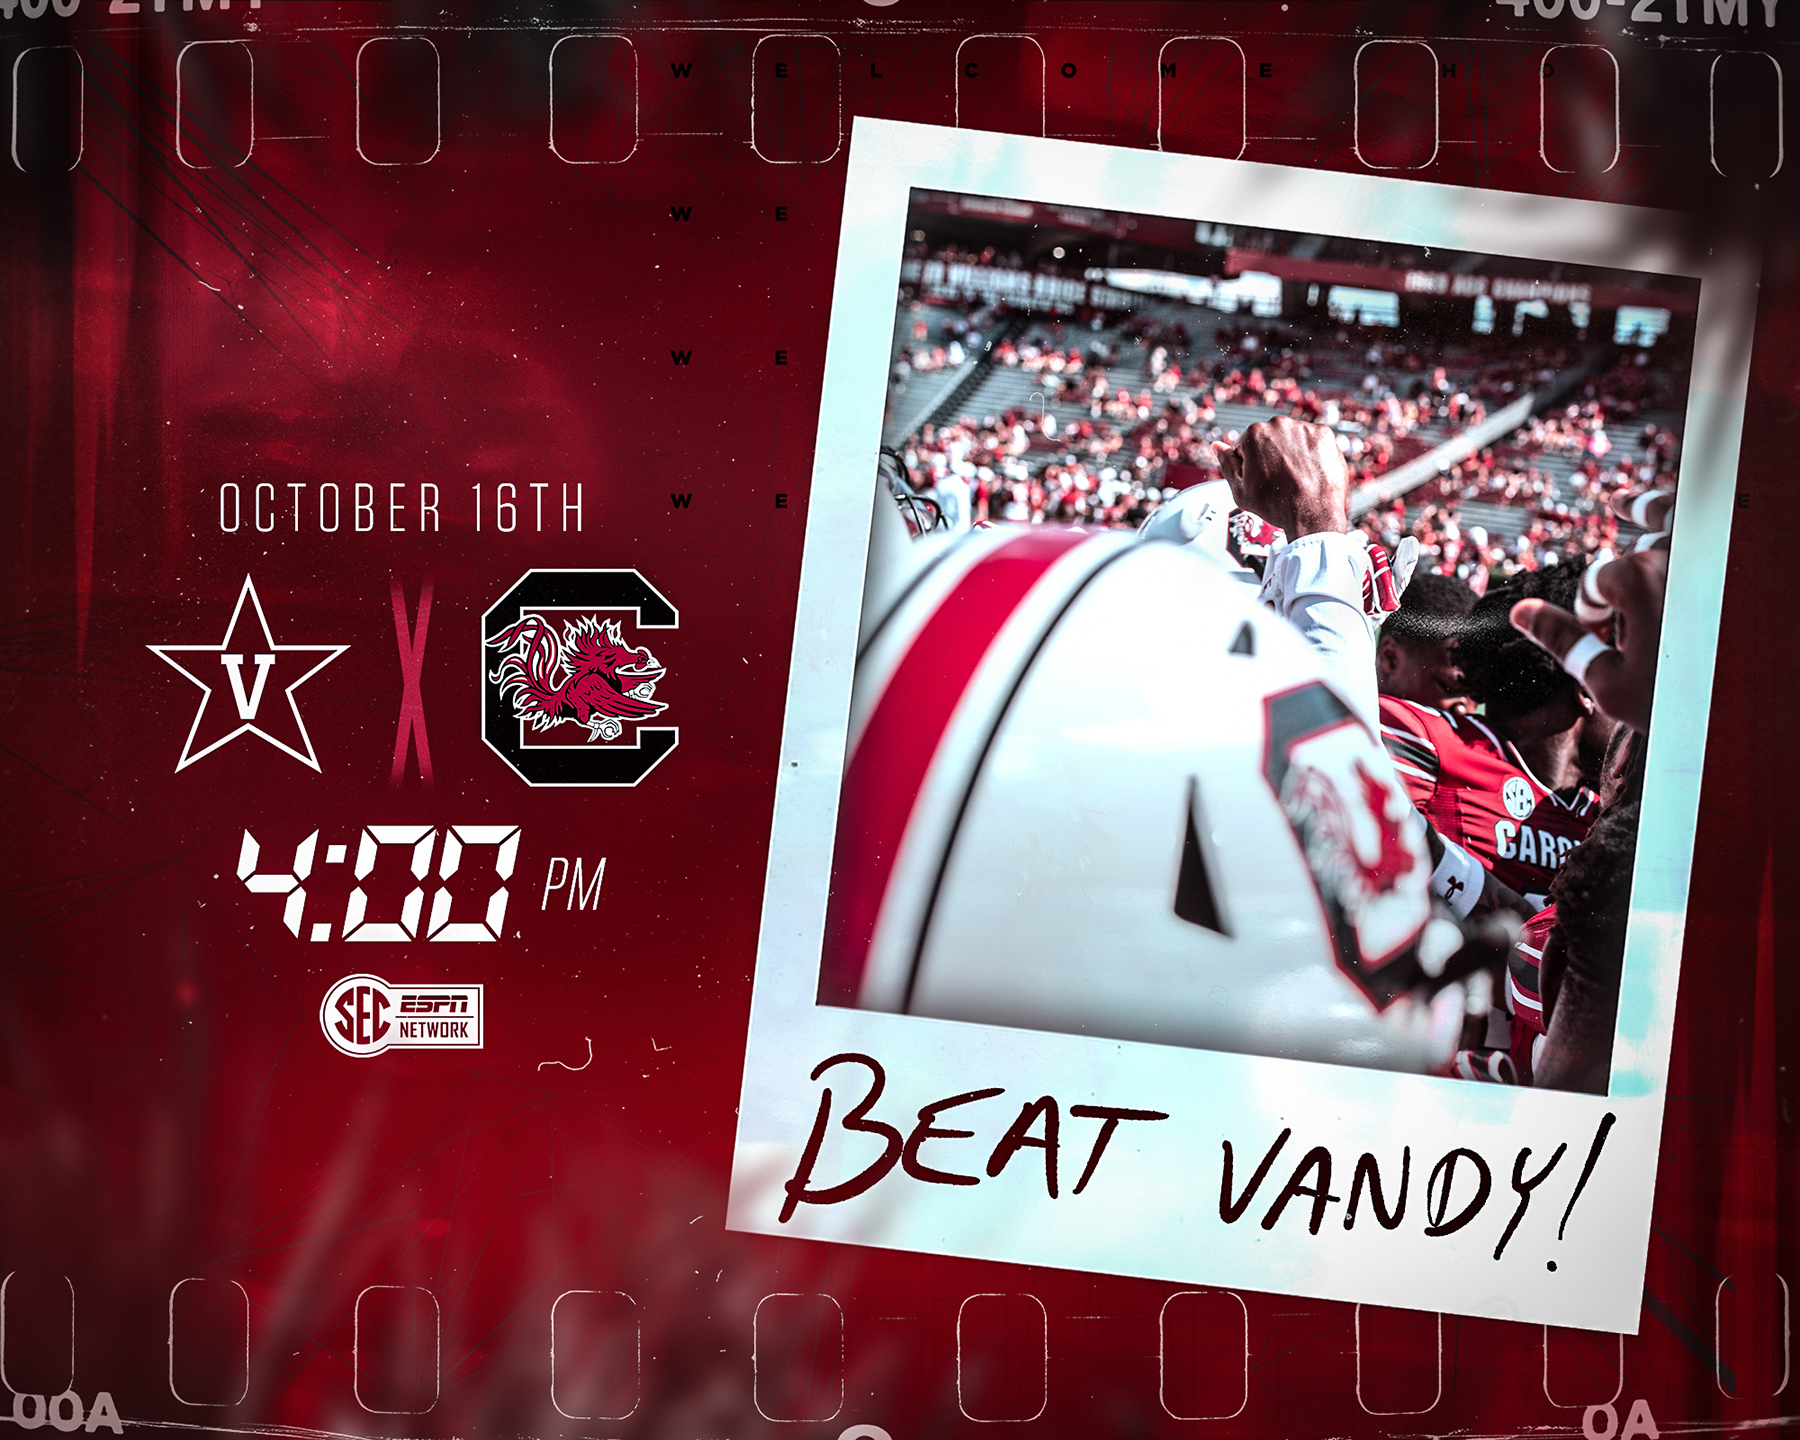 Gamecocks Host Vandy for Homecoming Game Saturday, Oct. 16